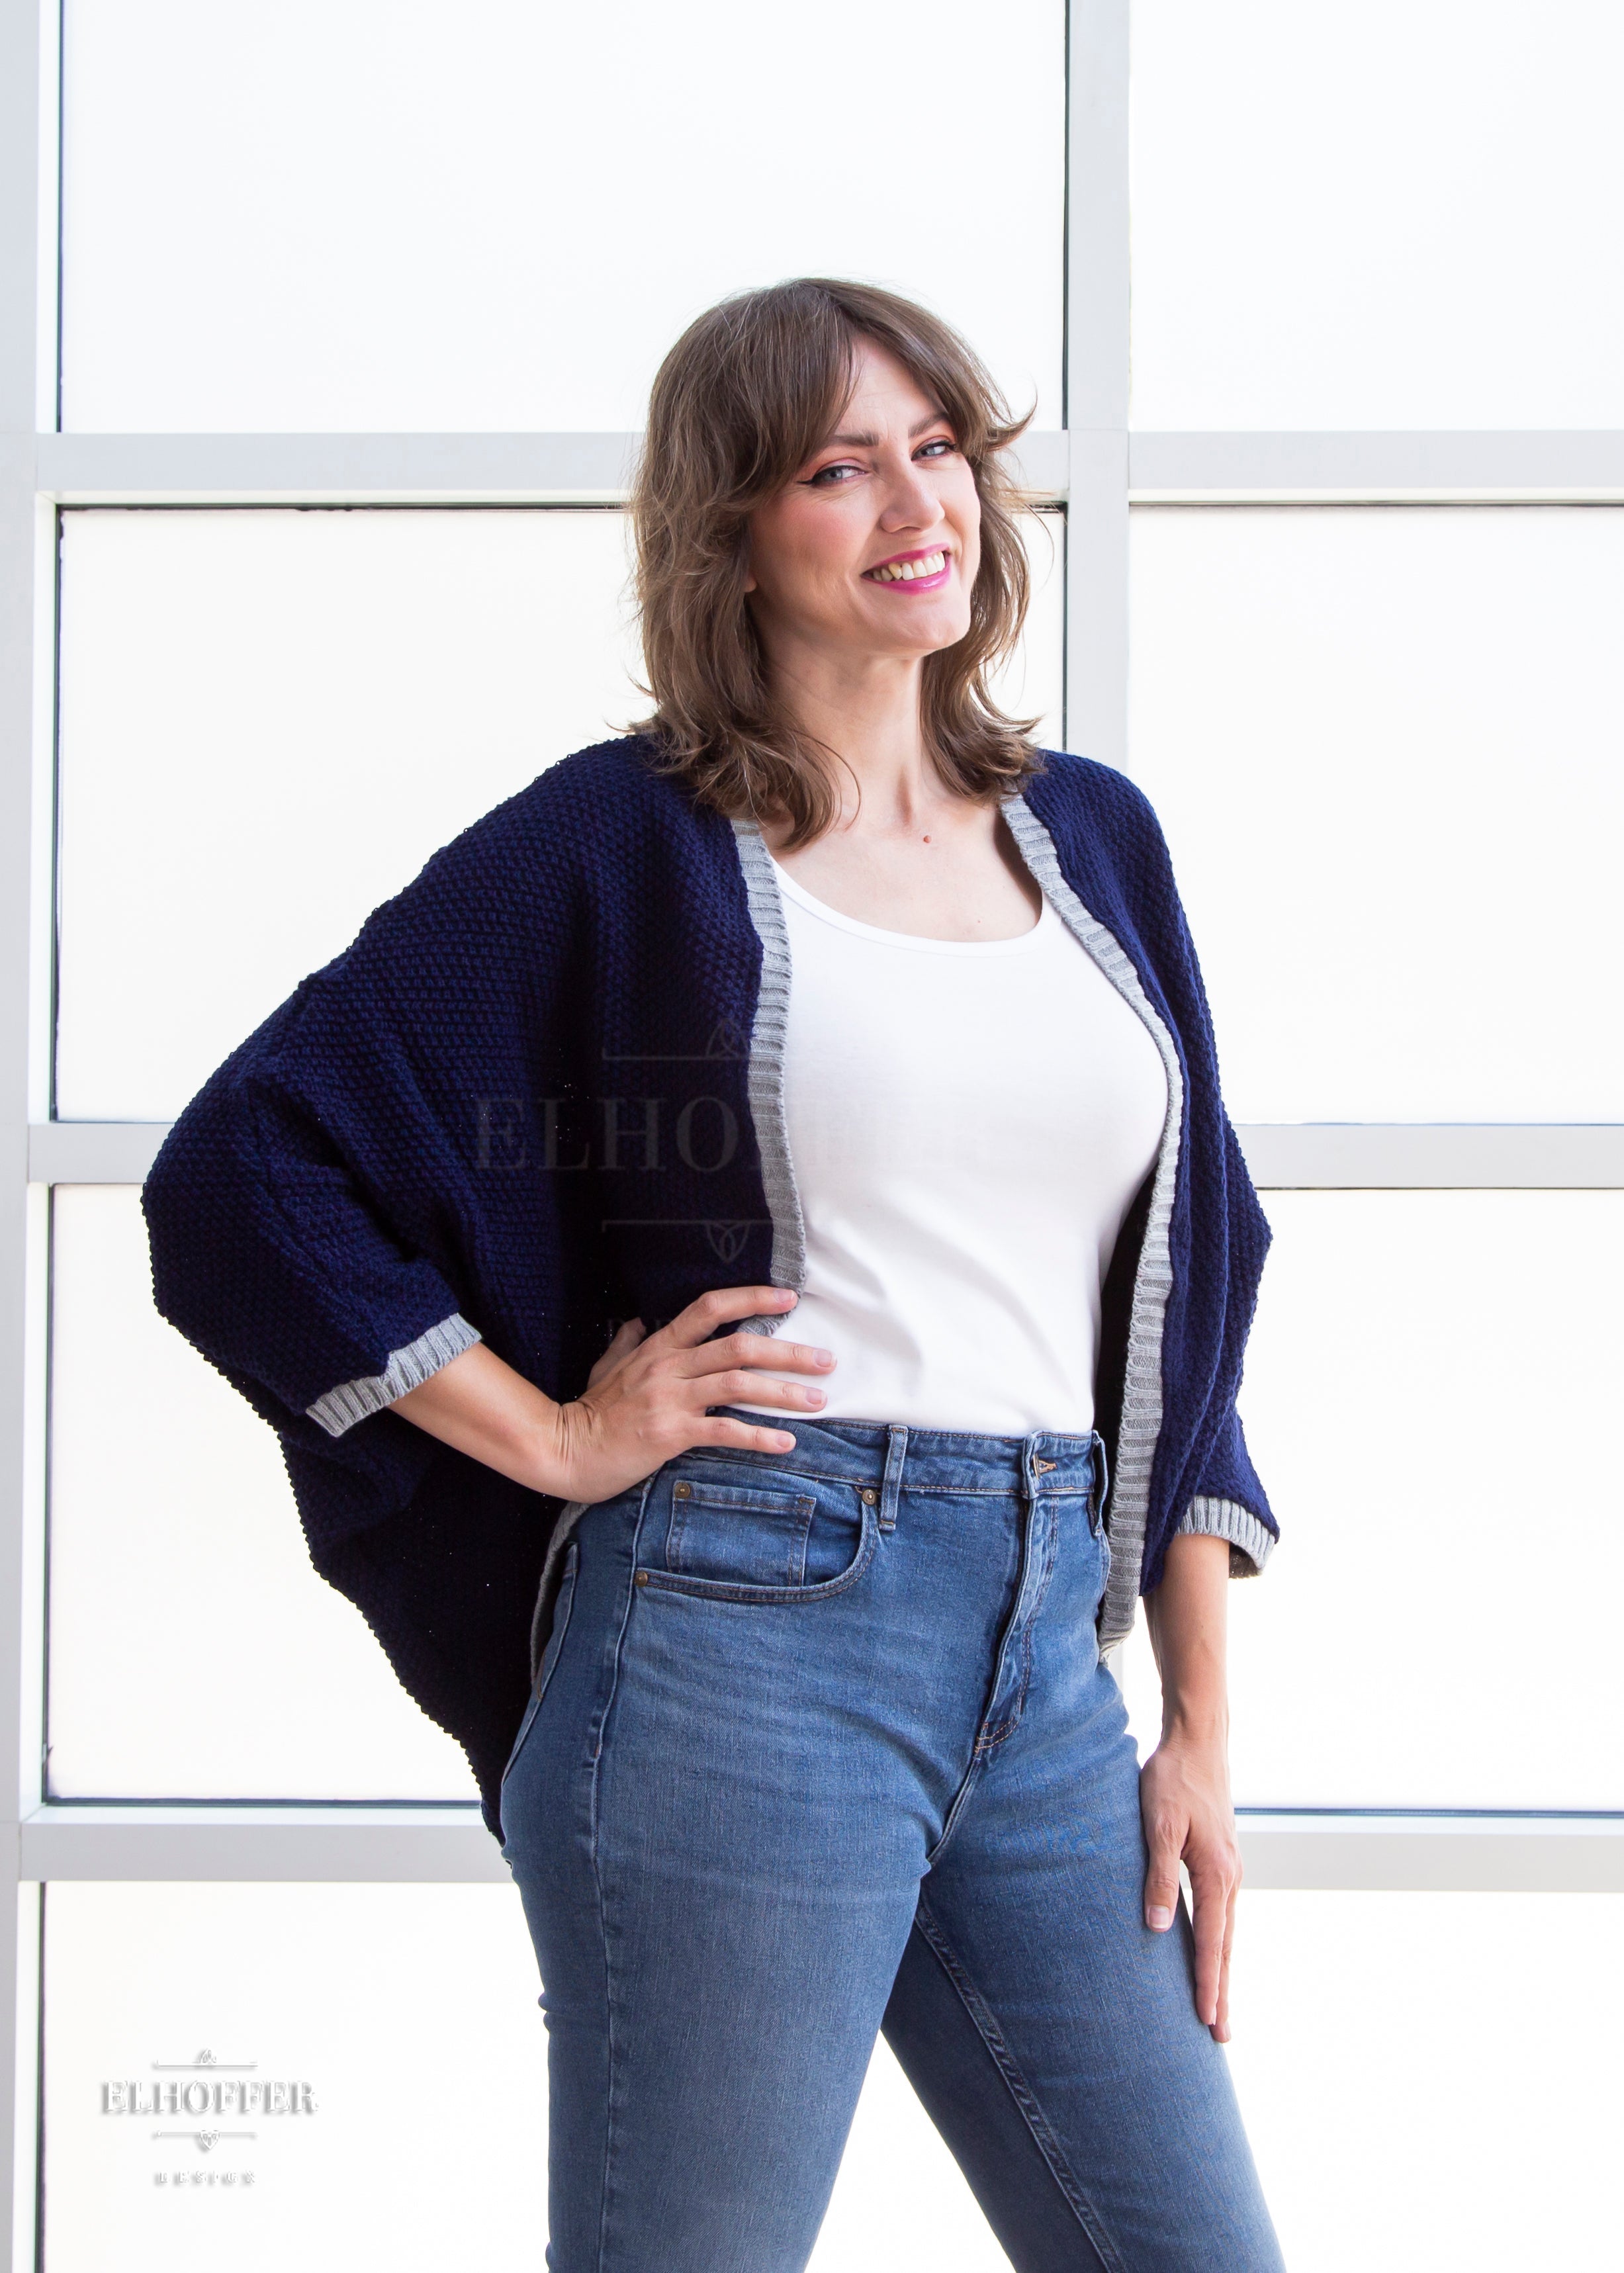 Ashley, a sun kissed skin M model with shoulder length feathered brown hair, is smiling while wearing a dark blue loose knit dolman with light grey ribbing around edges and cuffs. The dolman features 3/4 length sleeves and a magical script design (circle with T crossing through the circle) on the back.